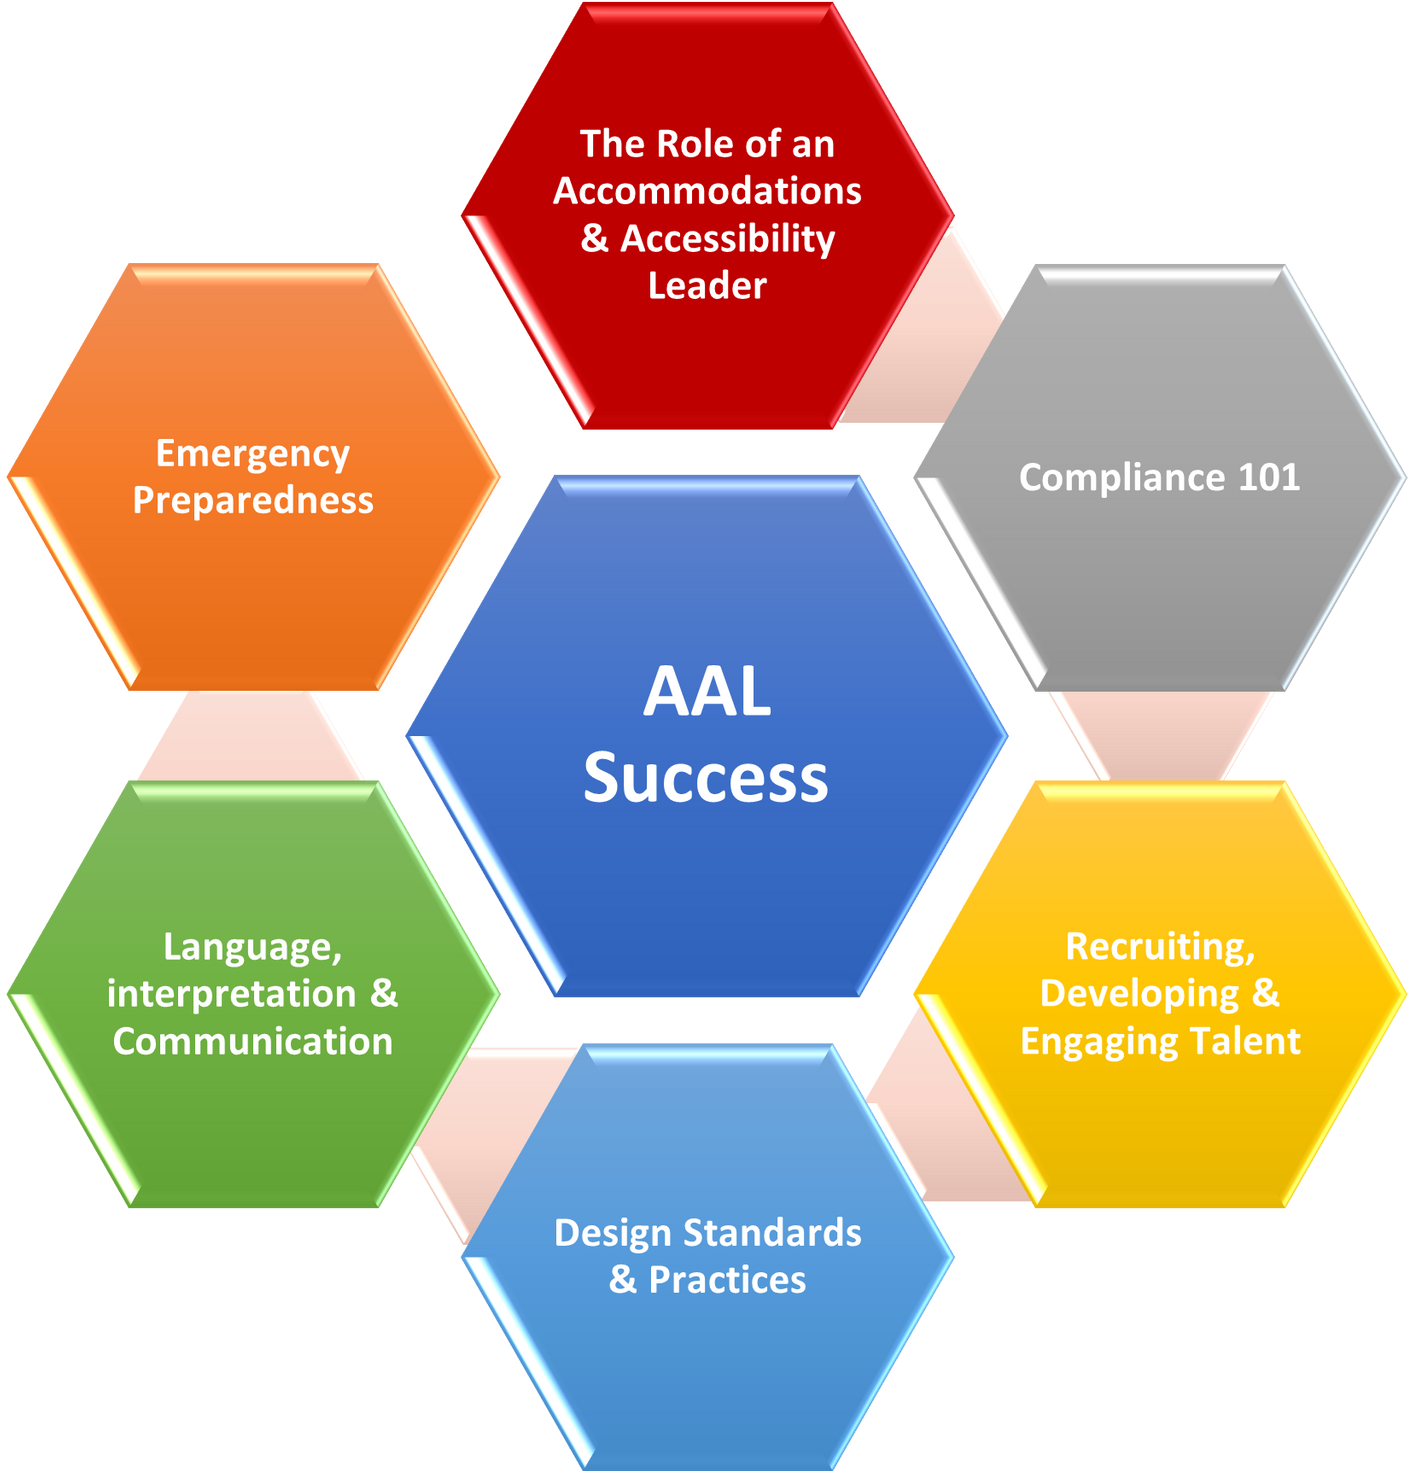 The framework for accommodation and accessibility leadership (AAL) success includes the role of an AAL leader; compliance 101; recruiting, developing and engaging talent; design standards and practices; language, interpretation and communication; and emergency preparedness